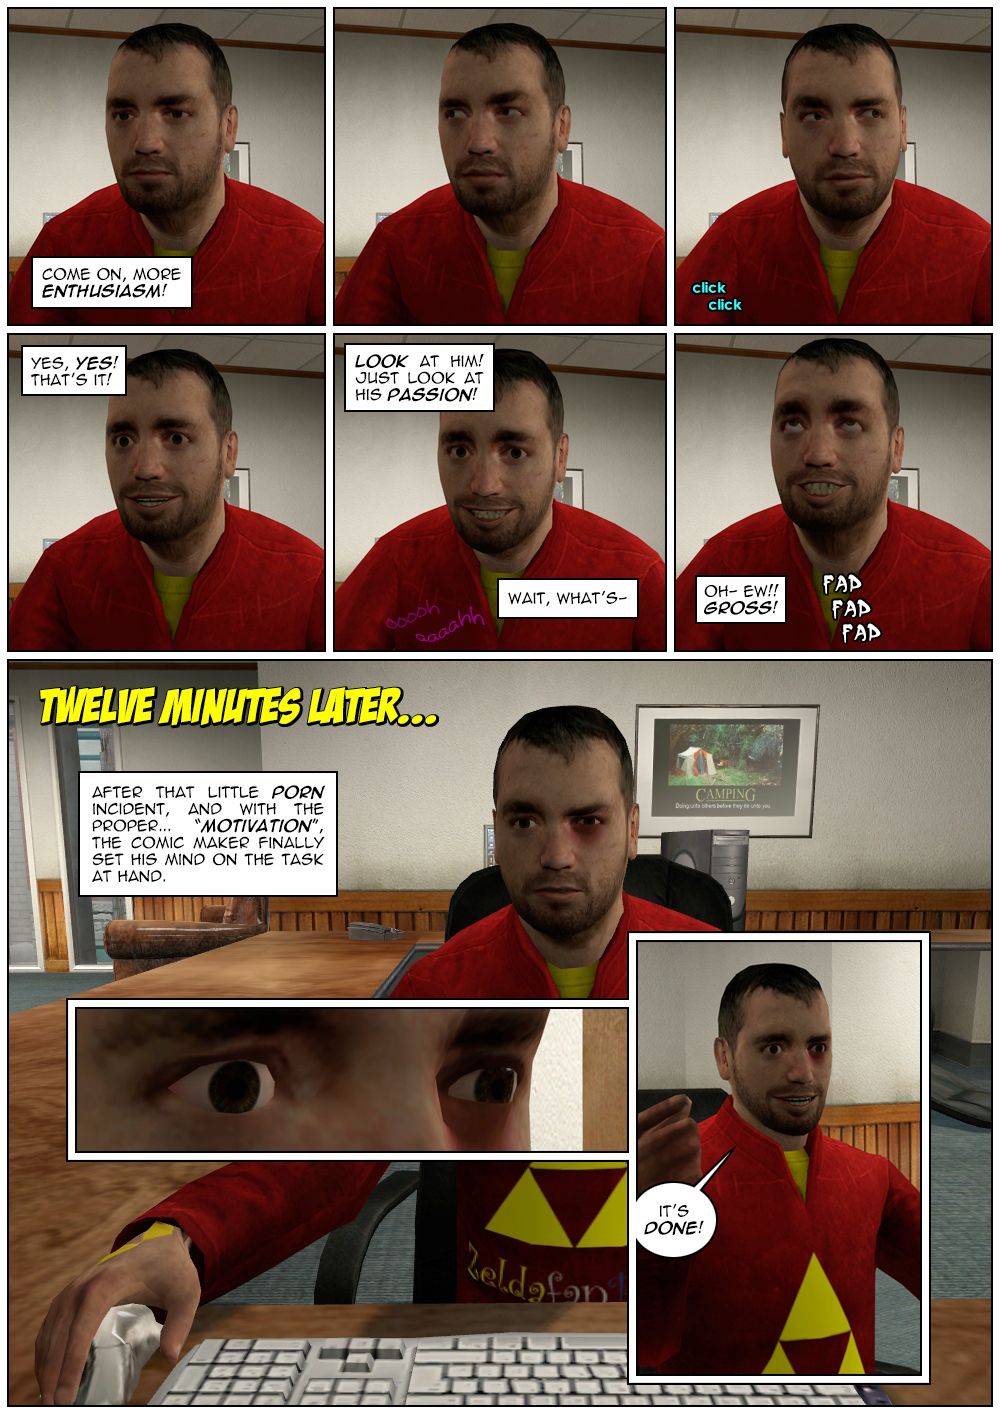 We see the comic maker's face looking bored as the narrator tells him to have more enthusiasm. The comic maker then looks left and right and afterwards his expression changes to one of joy. The narrator says yes, yes, that's it, and tells the reader to look at him and just look at his passion. The narrator then realizes he hears female voices moaning and says wait. The comic maker crosses his eyes as the narrator disgustedly realizes he's masturbating. Twelve minutes later, the comic maker is back at work with a black eye, as the narrator explains that, after that little porn incident and with the proper motivation, the comic maker finally set his mind on the task at hand. The comic maker's eyes then widen and he exclaims that it's done.